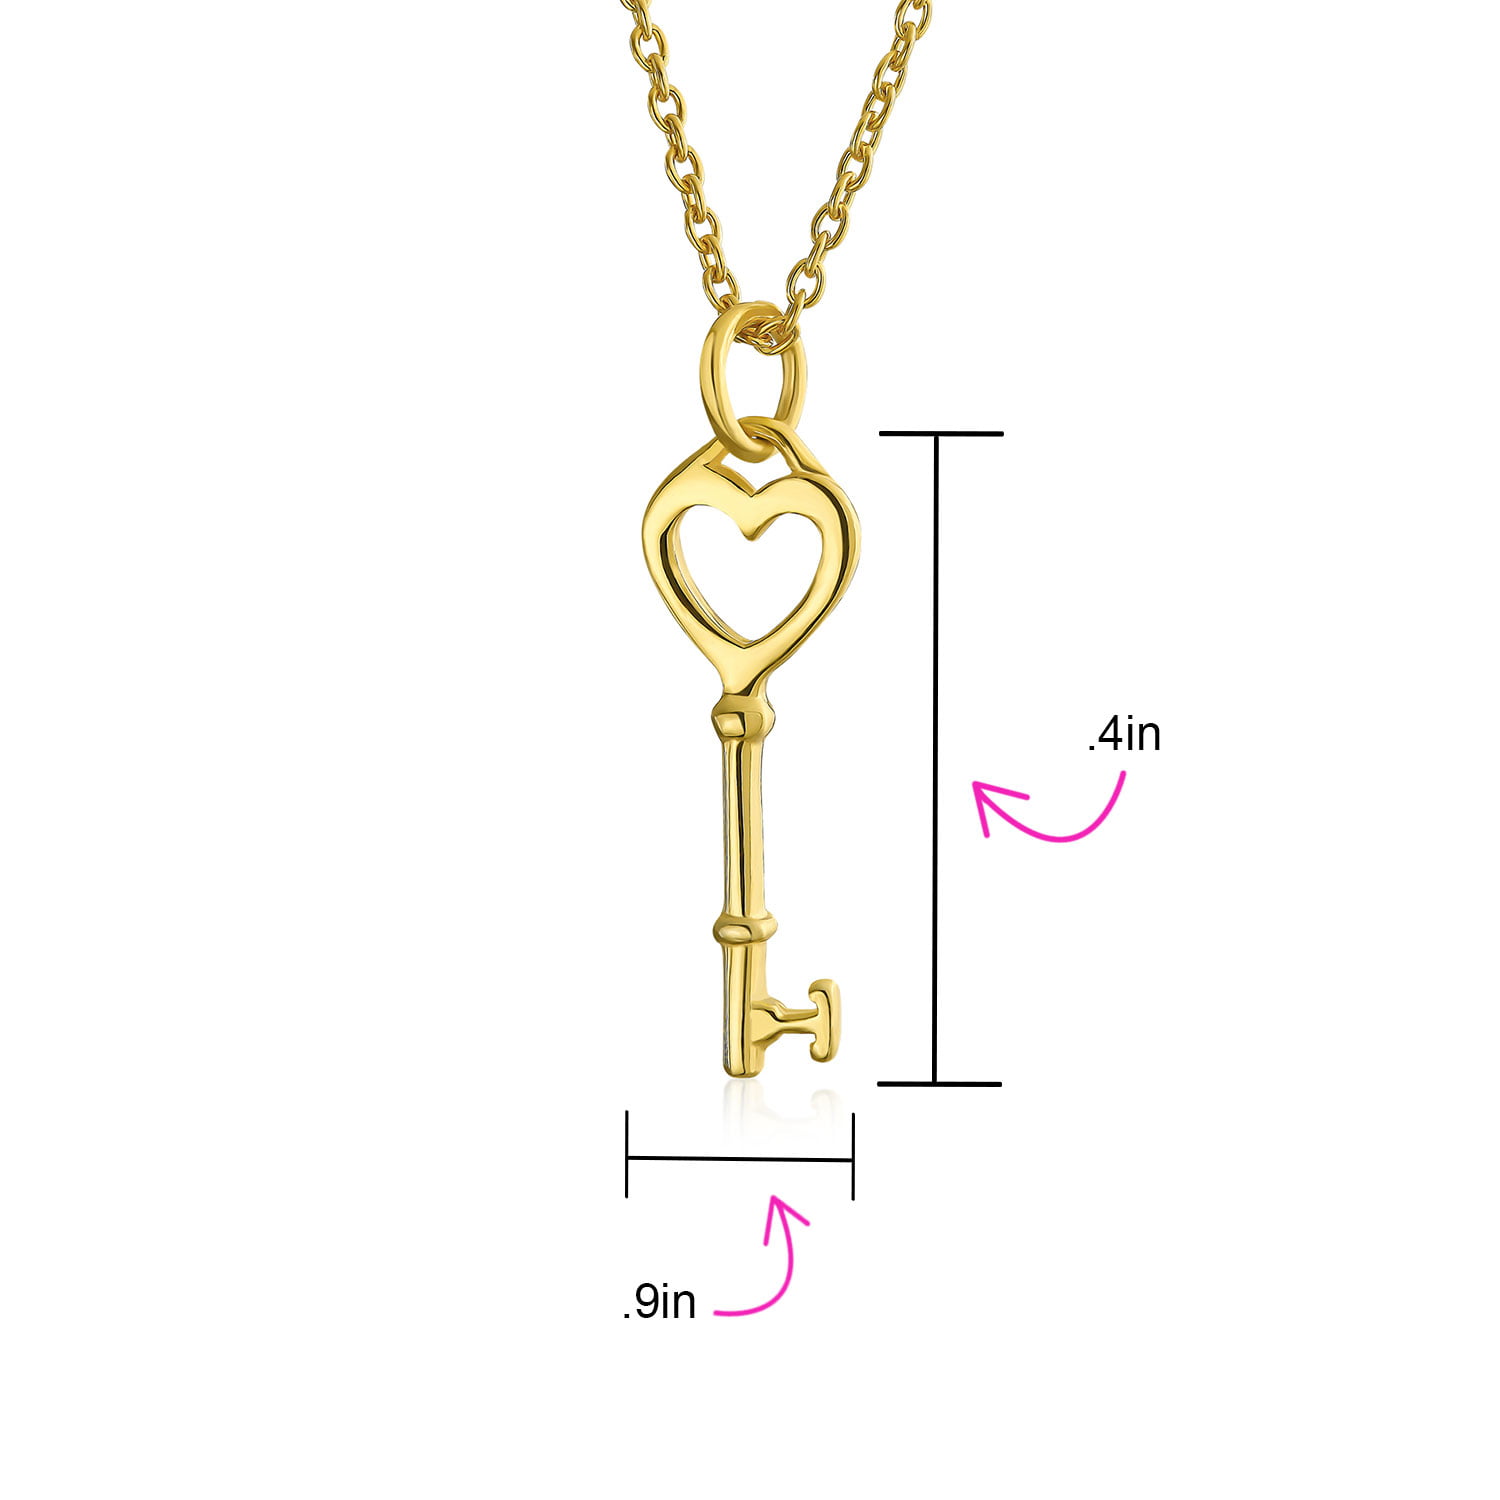 Key To Her Heart Petite Skeleton Key Pendant Necklace In Sterling Silver Cubic Zirconias Accented